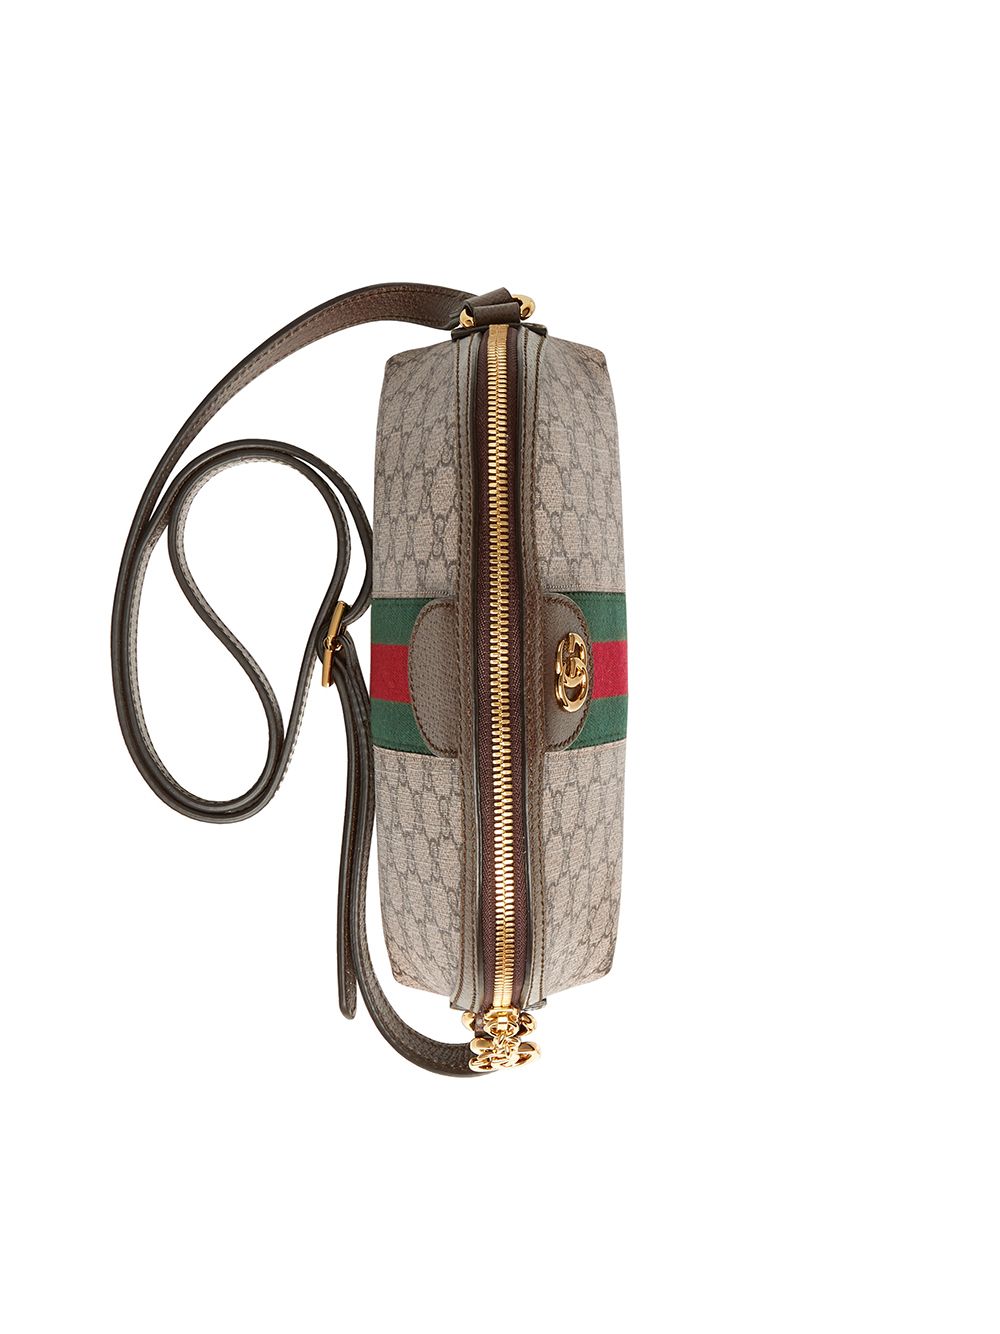 Gucci Small Ophidia Shoulder Bag